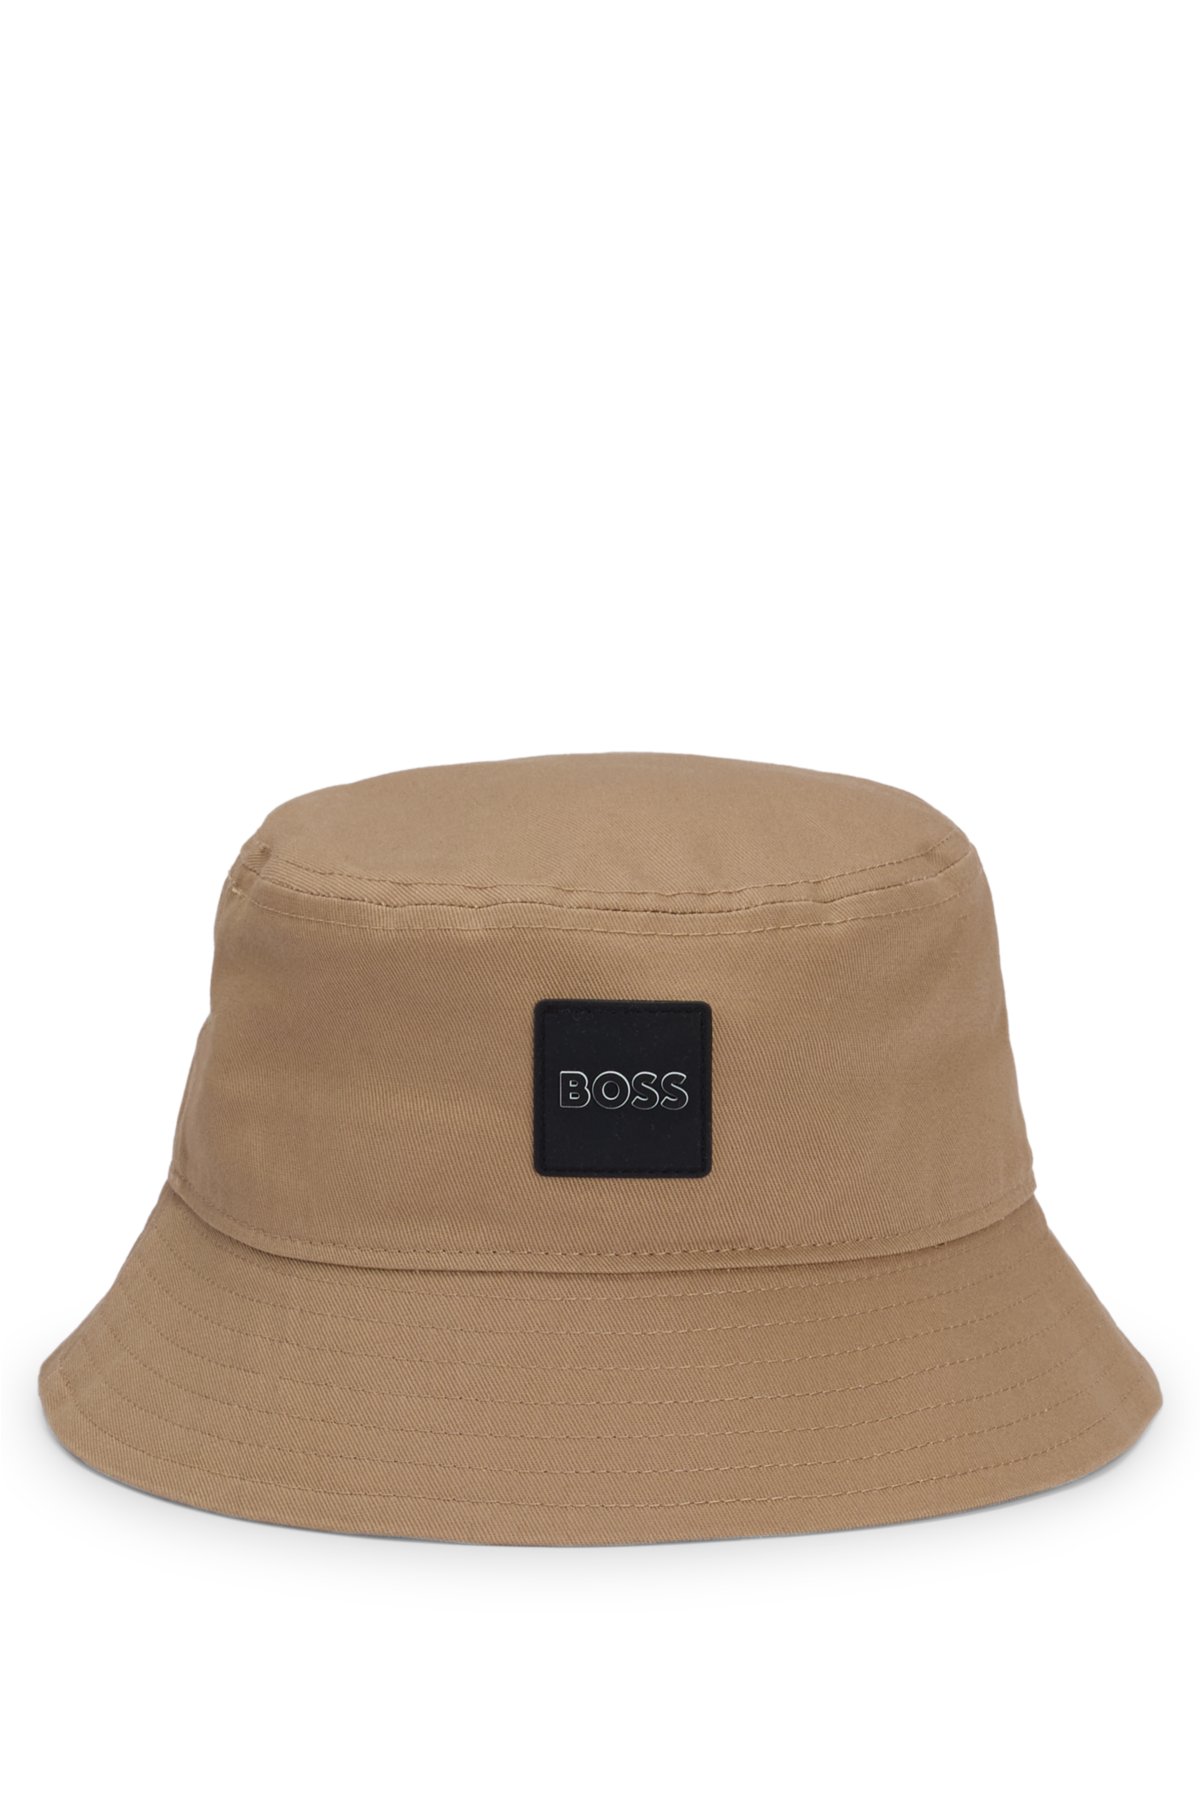 Kids' bucket hat in cotton twill with rubber logo, Brown